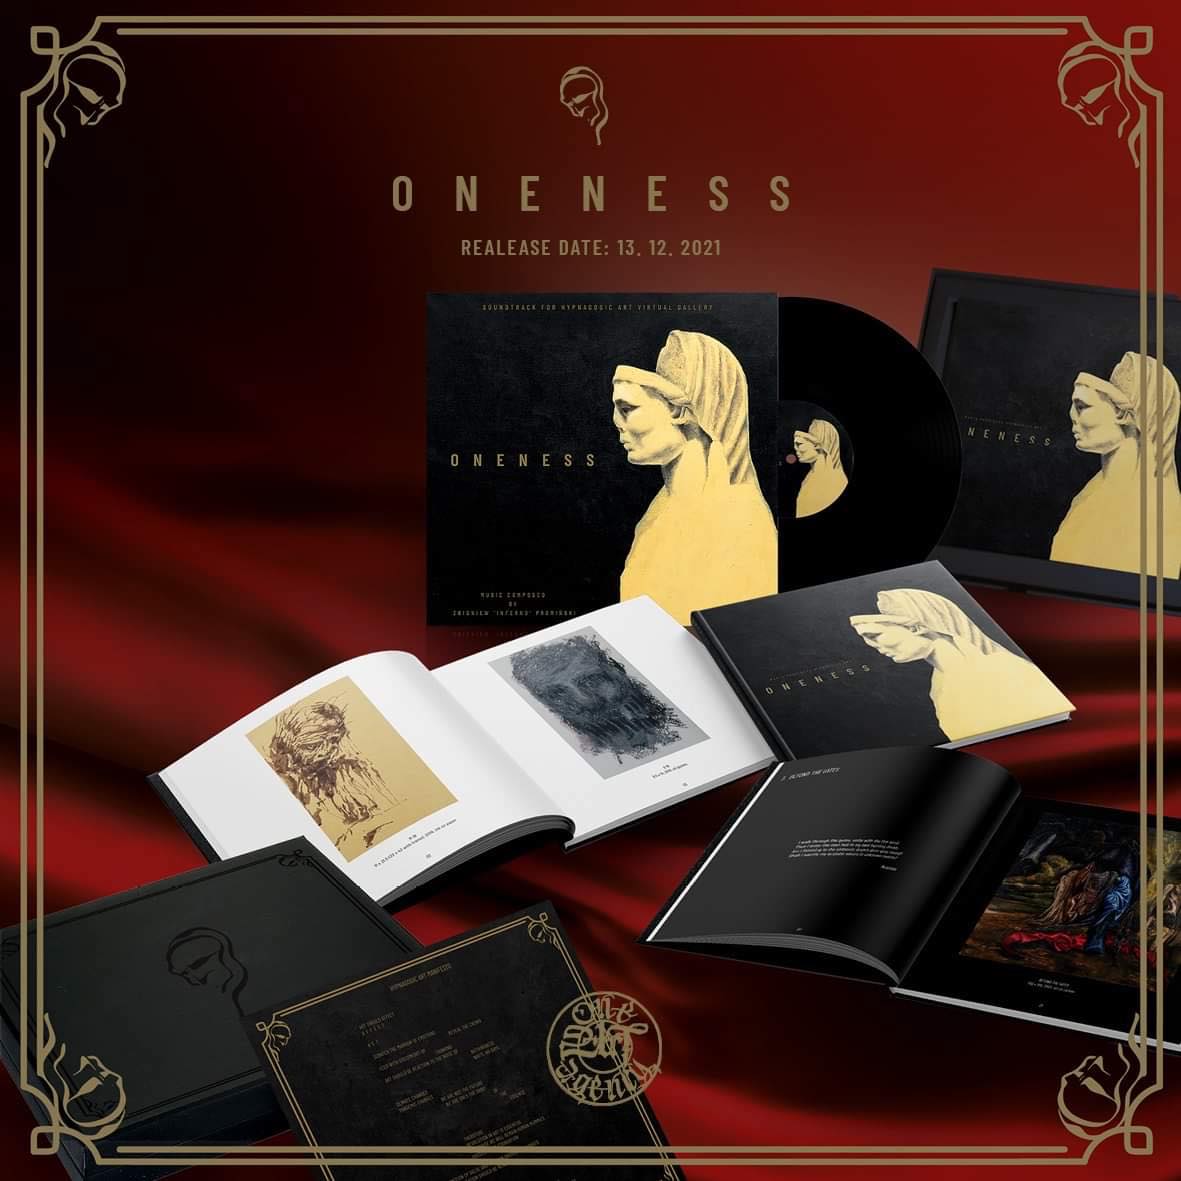 ONENESS Art Album and Viny Record, SIGNED, NUMBERED, LIMITED!